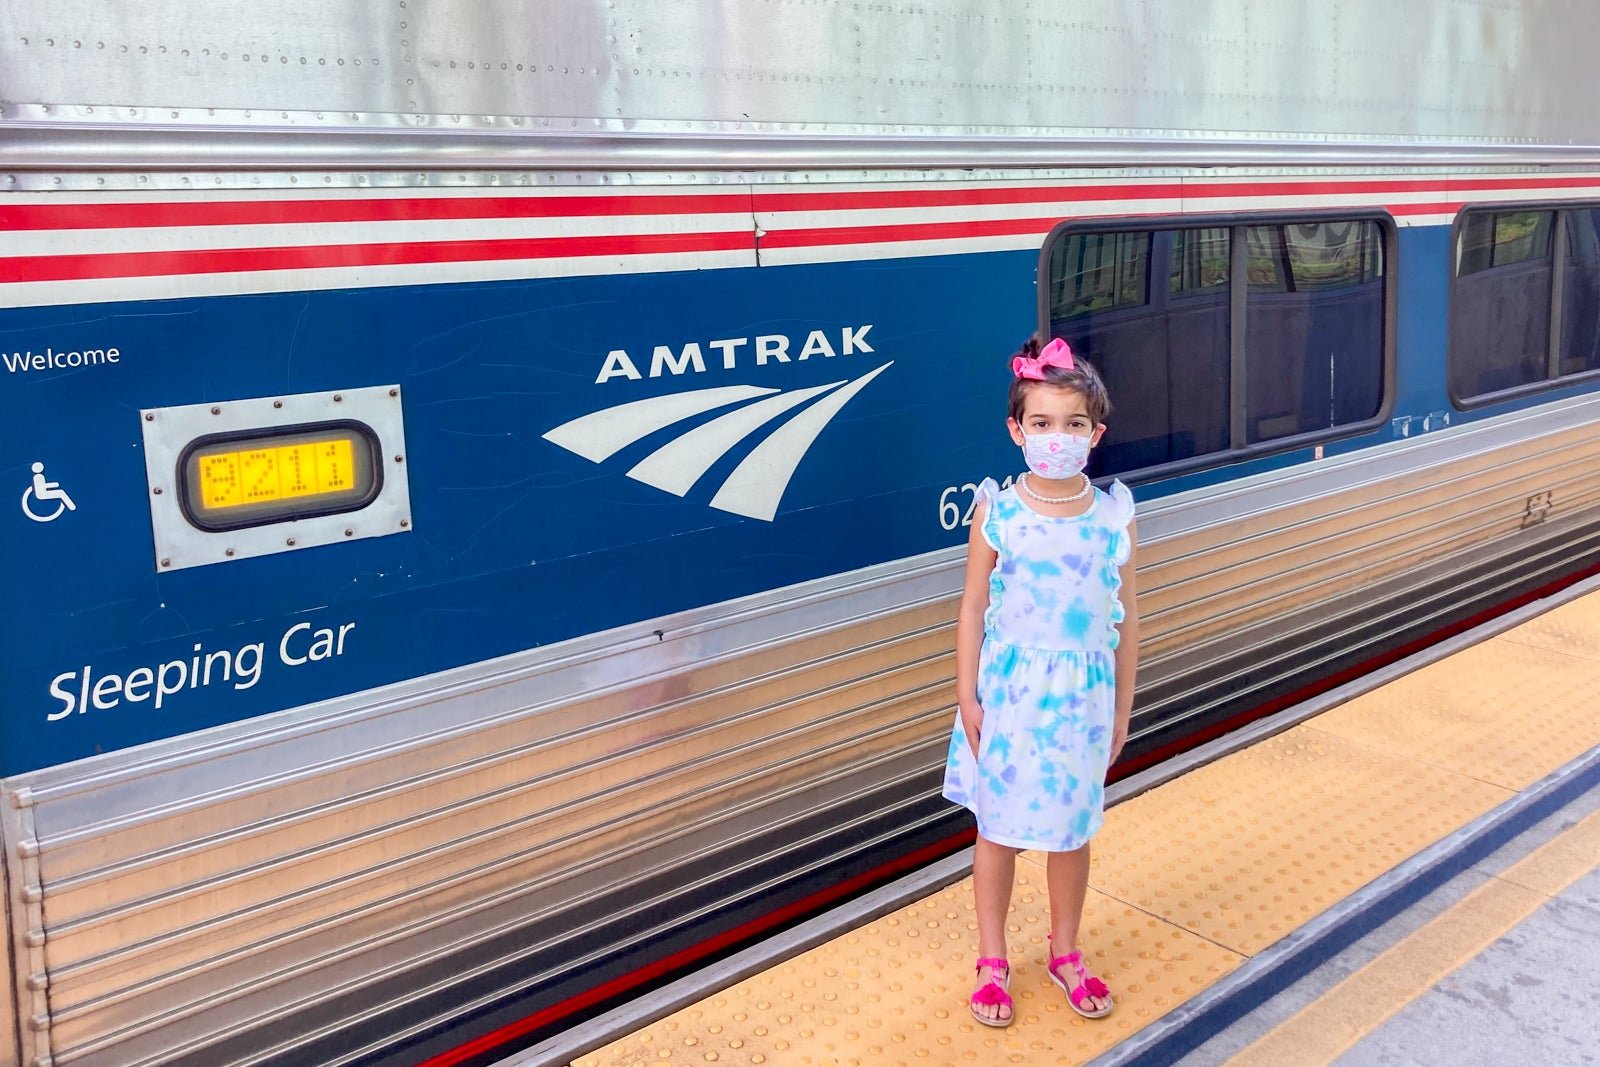 My daughter and I took a train while my wife flew from Florida to DC